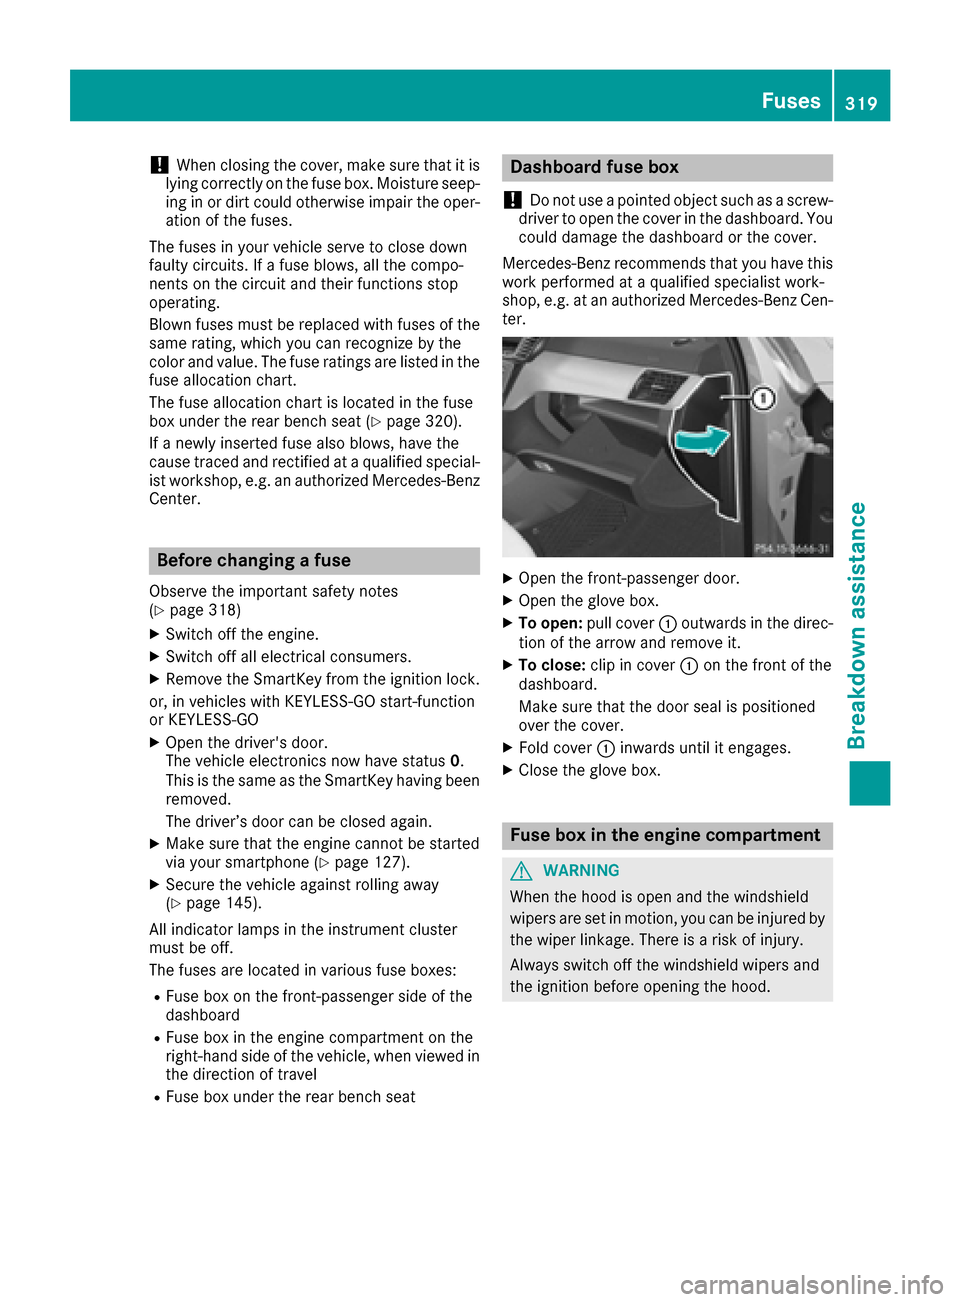 MERCEDES-BENZ GLE COUPE 2017 C292 Owners Manual !When closing the cover, make sure that it is
lying correctly on the fuse box. Moisture seep-
ing in or dirt could otherwise impair the oper-
ation of the fuses.
The fuses in your vehicle serve to clo